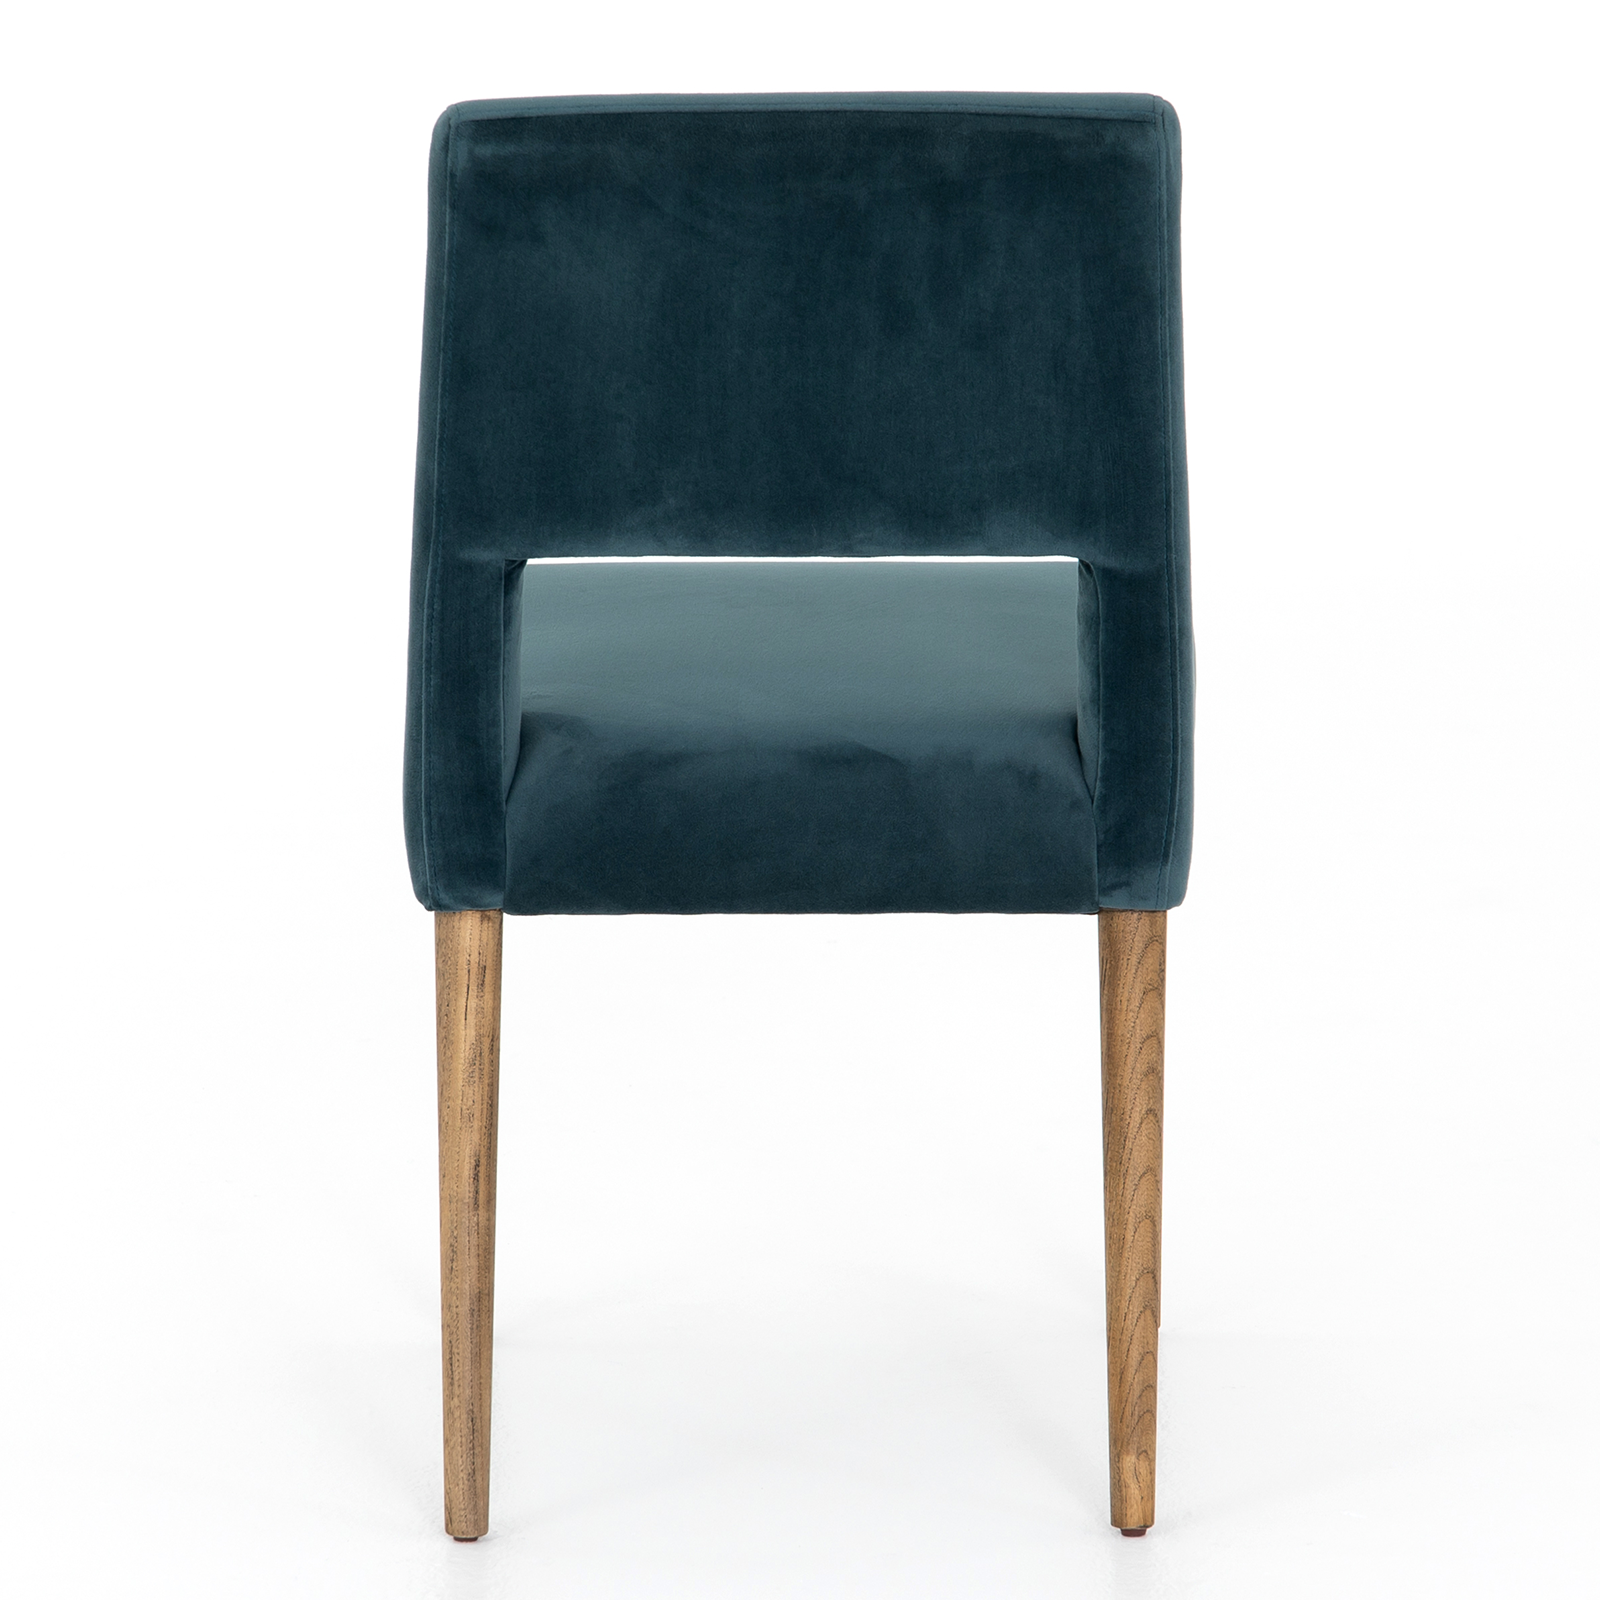 Joie Dining Chair